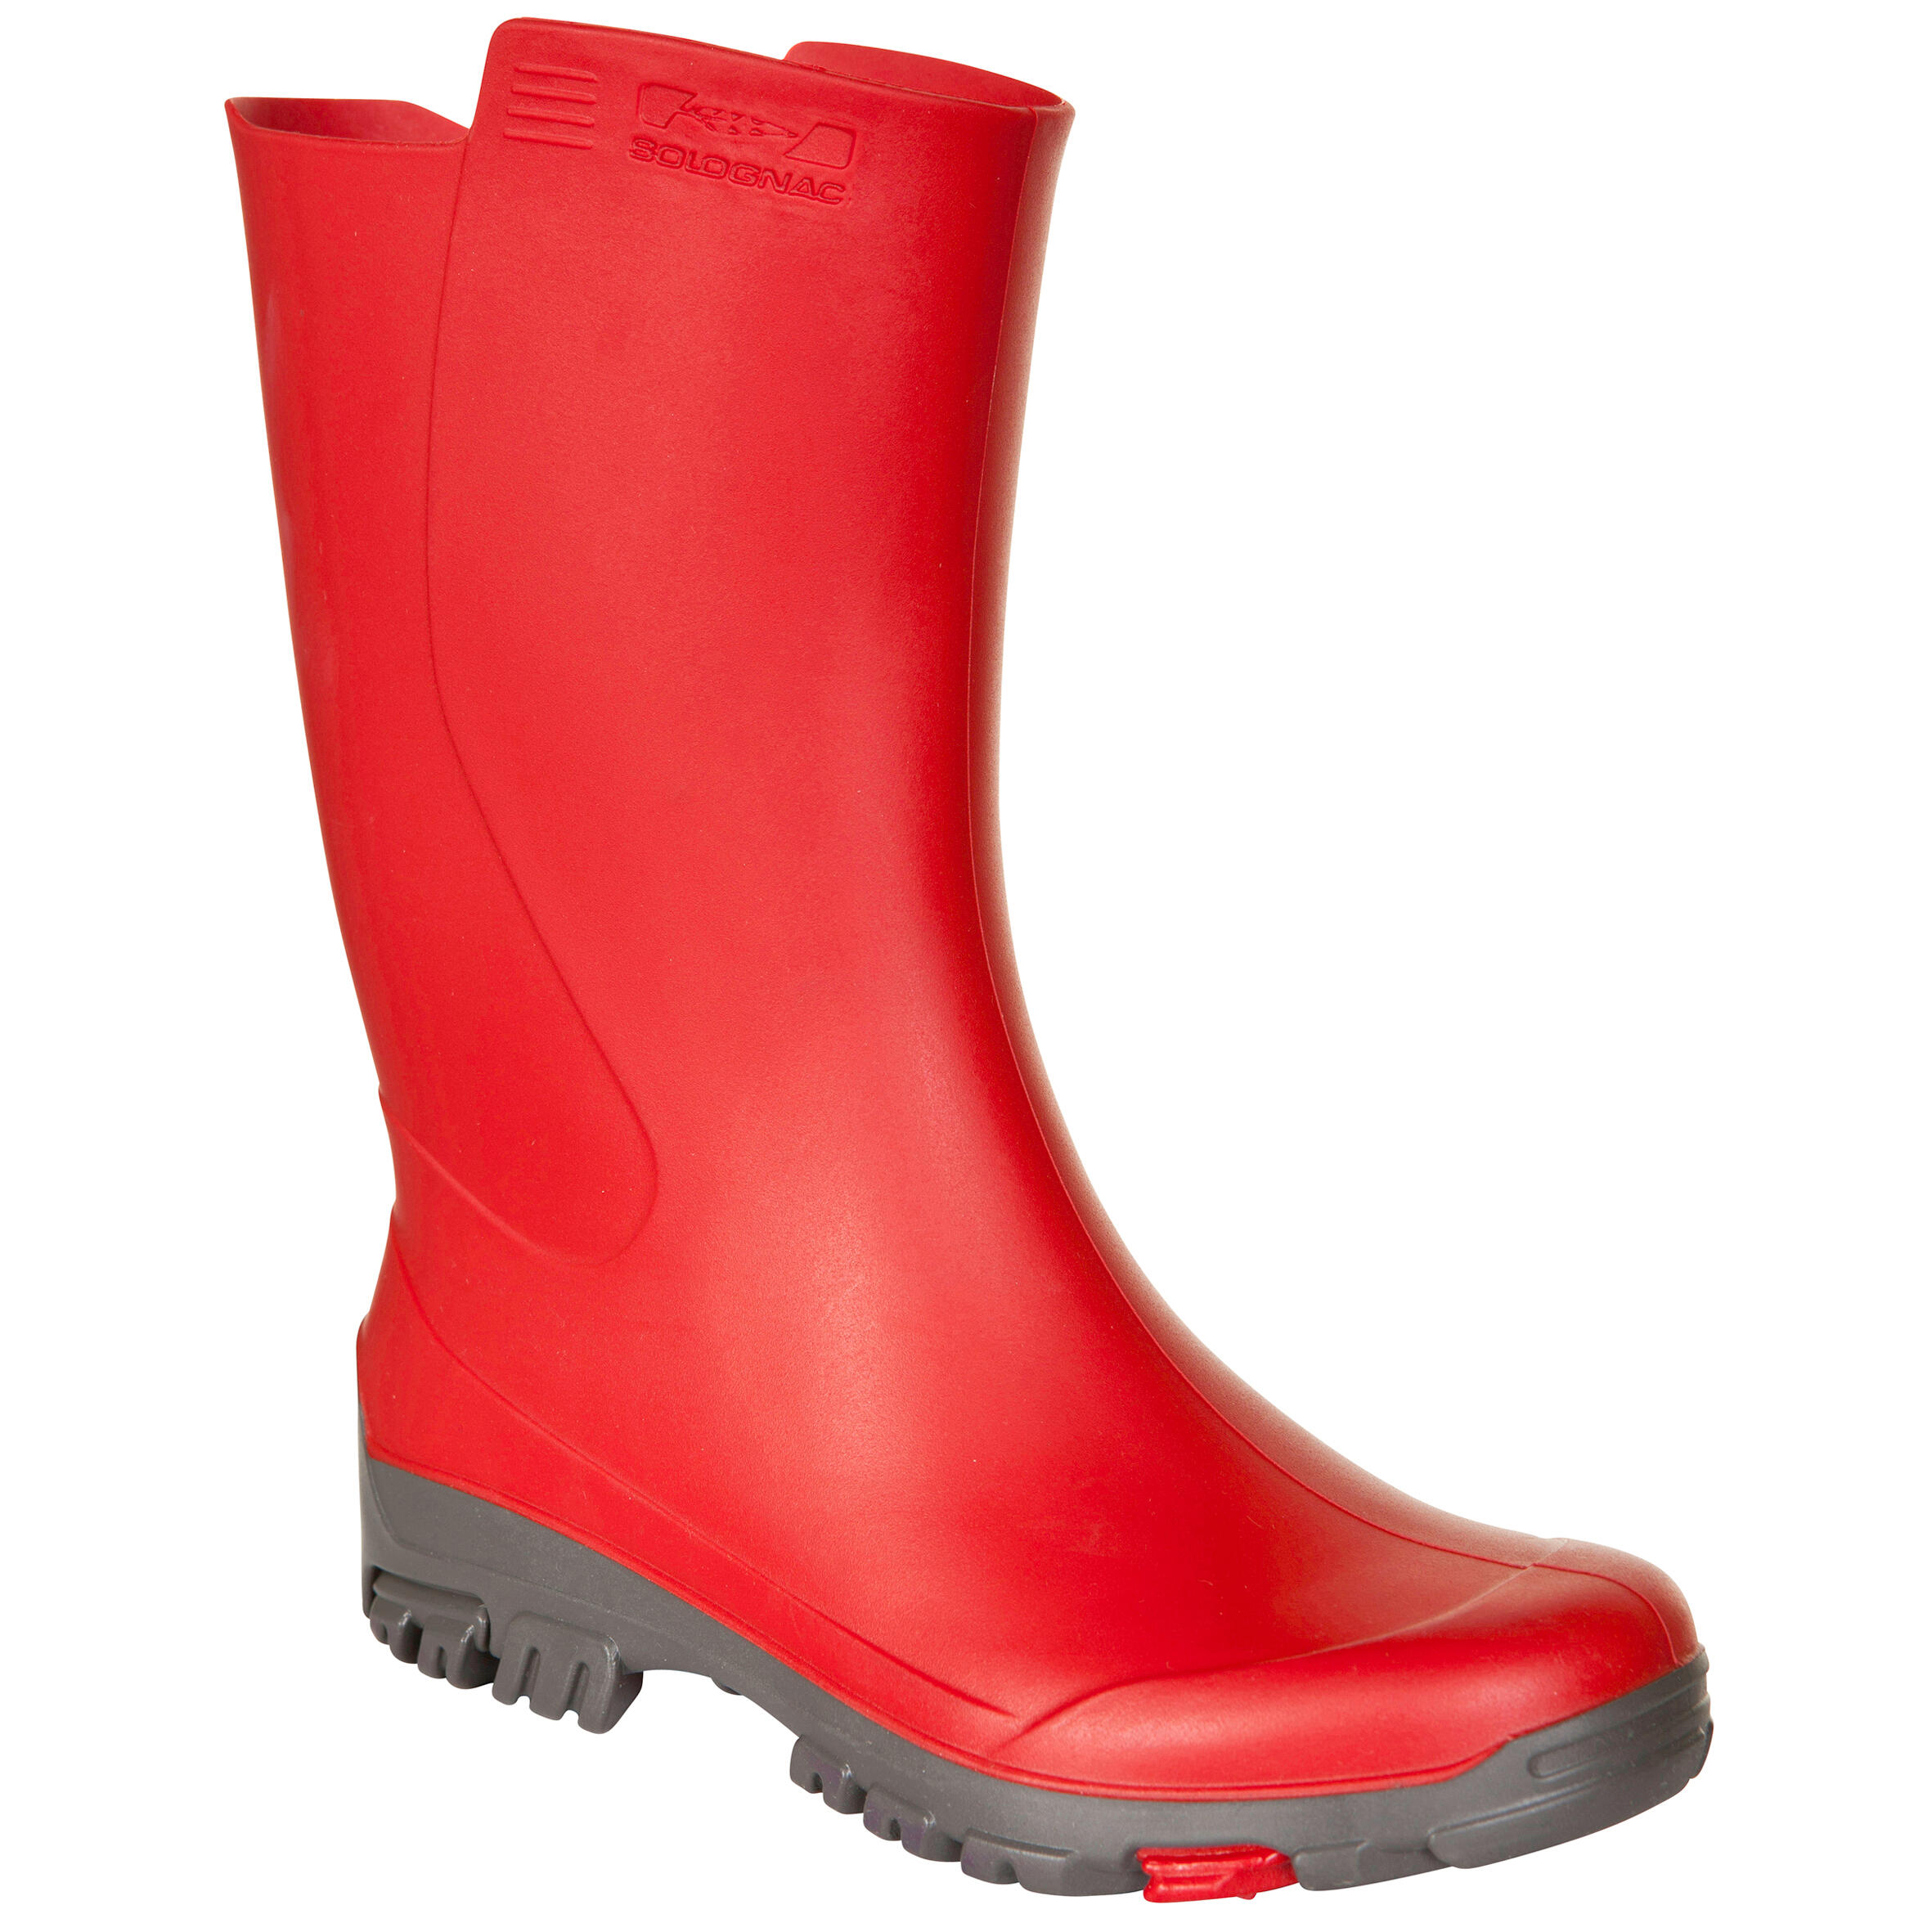 Buy Gumboots for Monsoon Online at 